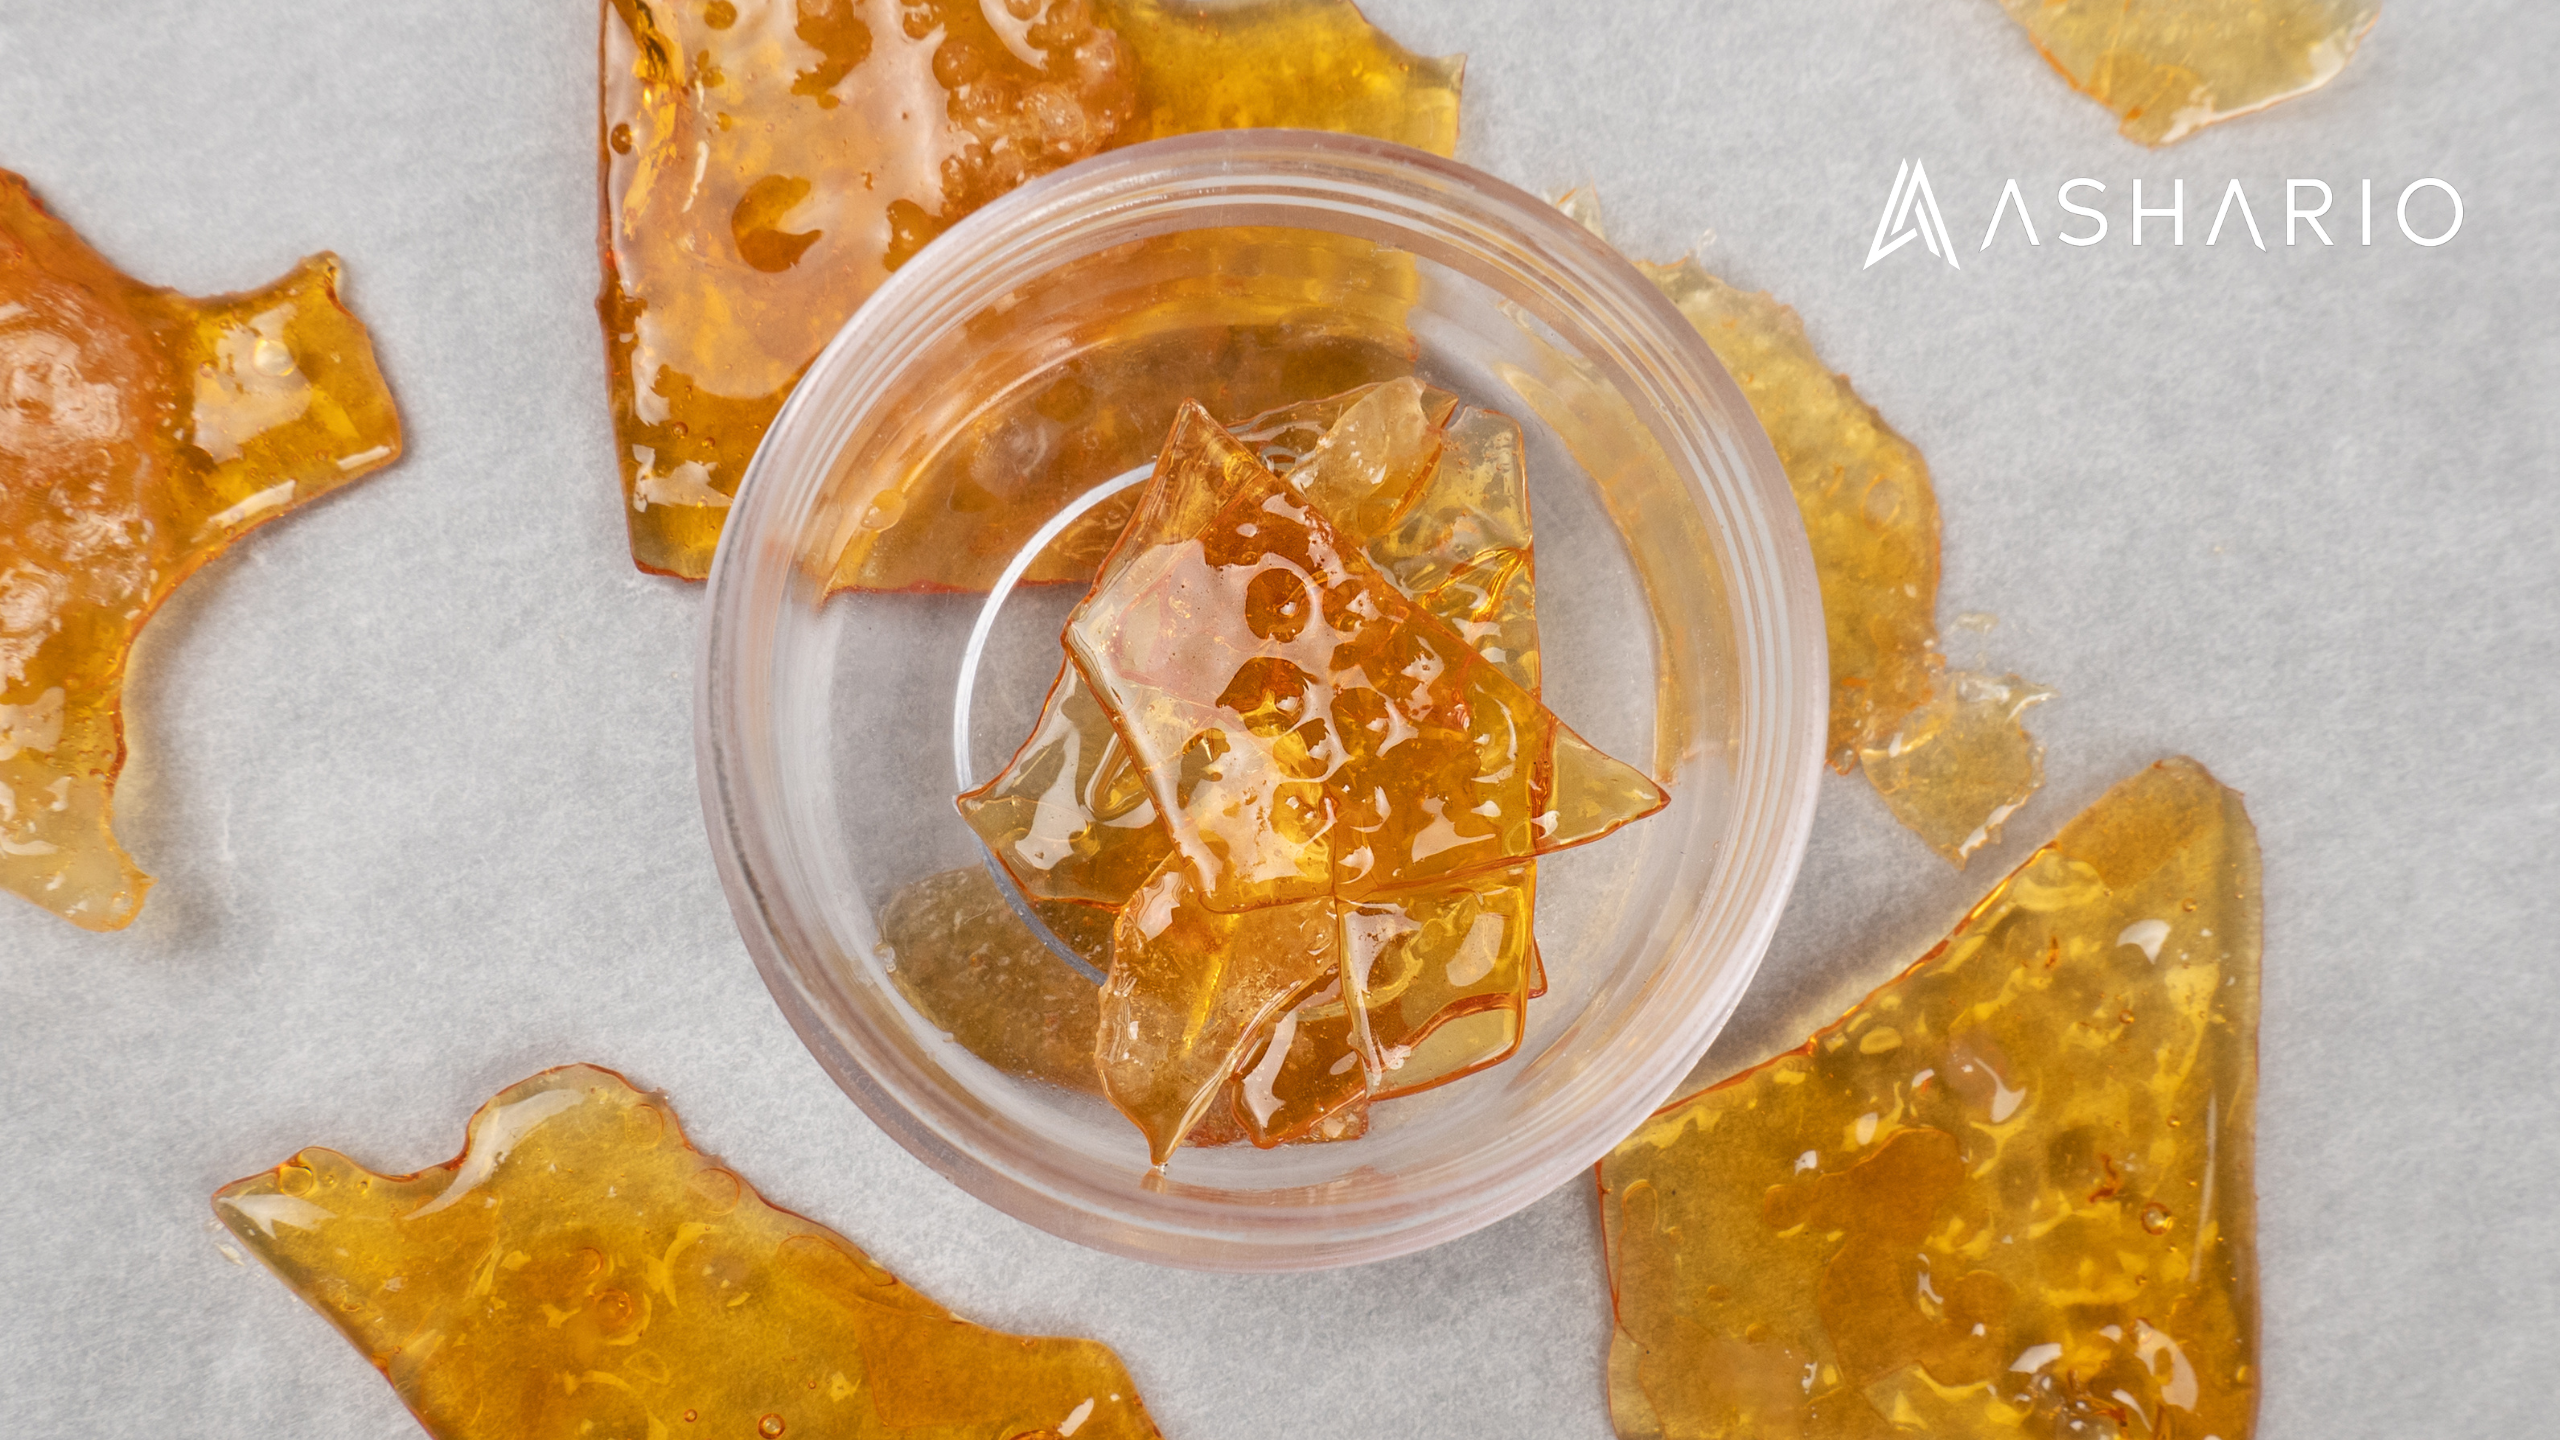 Learn how to consume shatter like a pro with our comprehensive guide. Whether you're a novice or seasoned enthusiast, mastering the art of shatter consumption is essential for maximizing its effects.